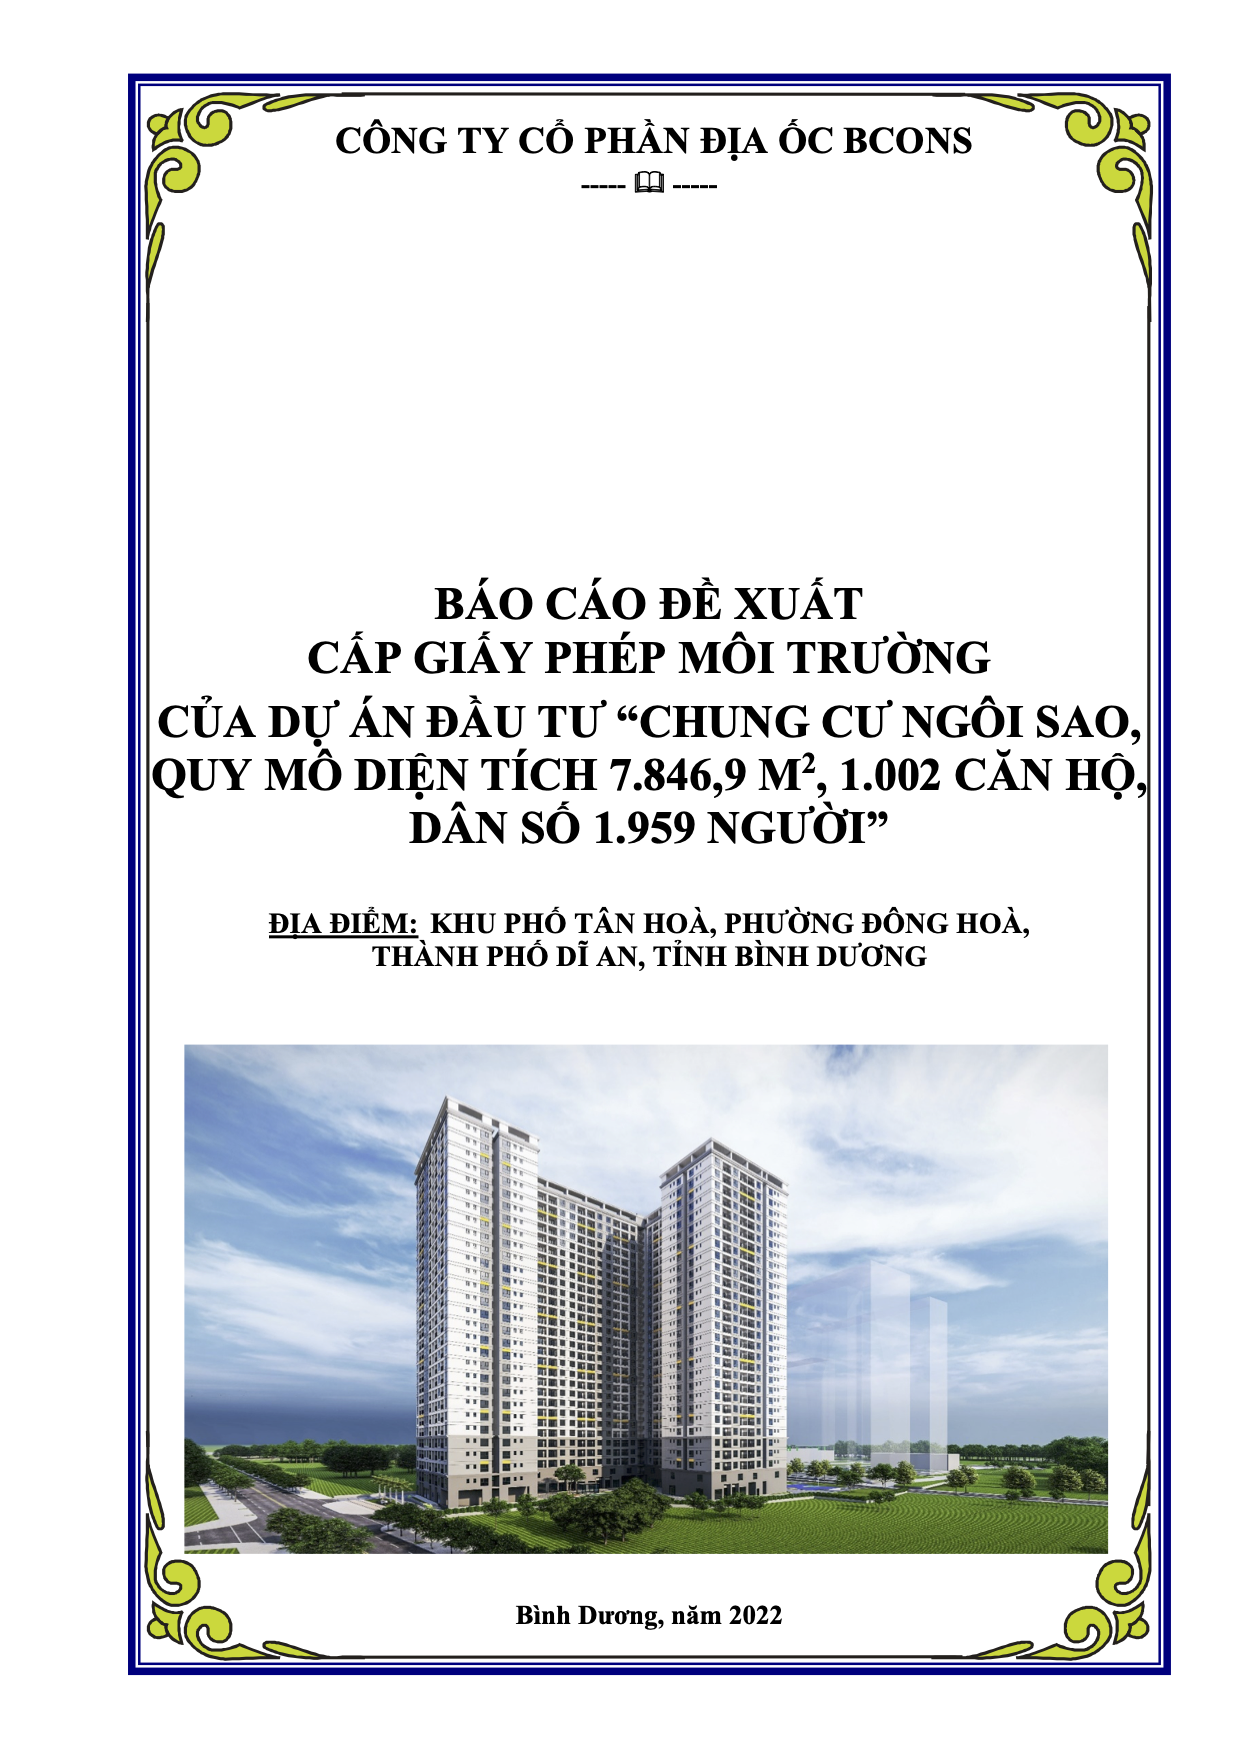 GPMT - NGOI SAO APARTMENT INVESTMENT PROJECT, AREA 7,846.9 SQM, 1,002 APARTMENTS, POPULATION 1,959 PEOPLE